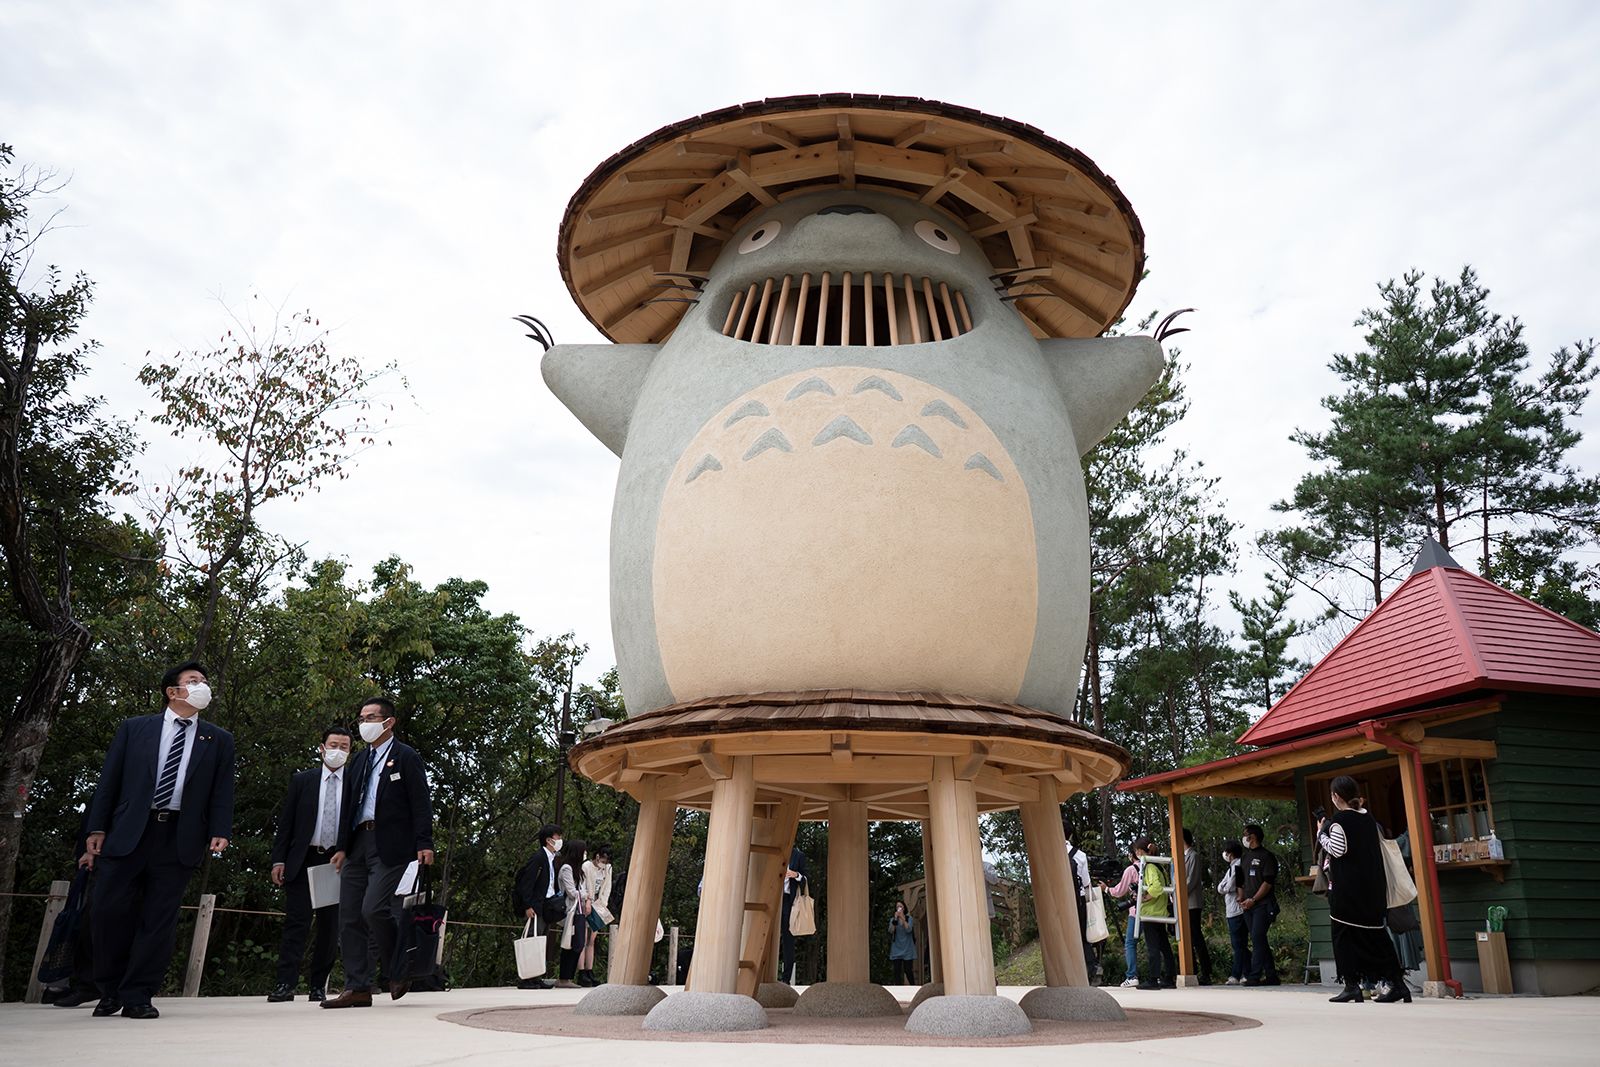 Rejoice, Ghibli Fans! The Studio Ghibli Theme Park Is Opening This